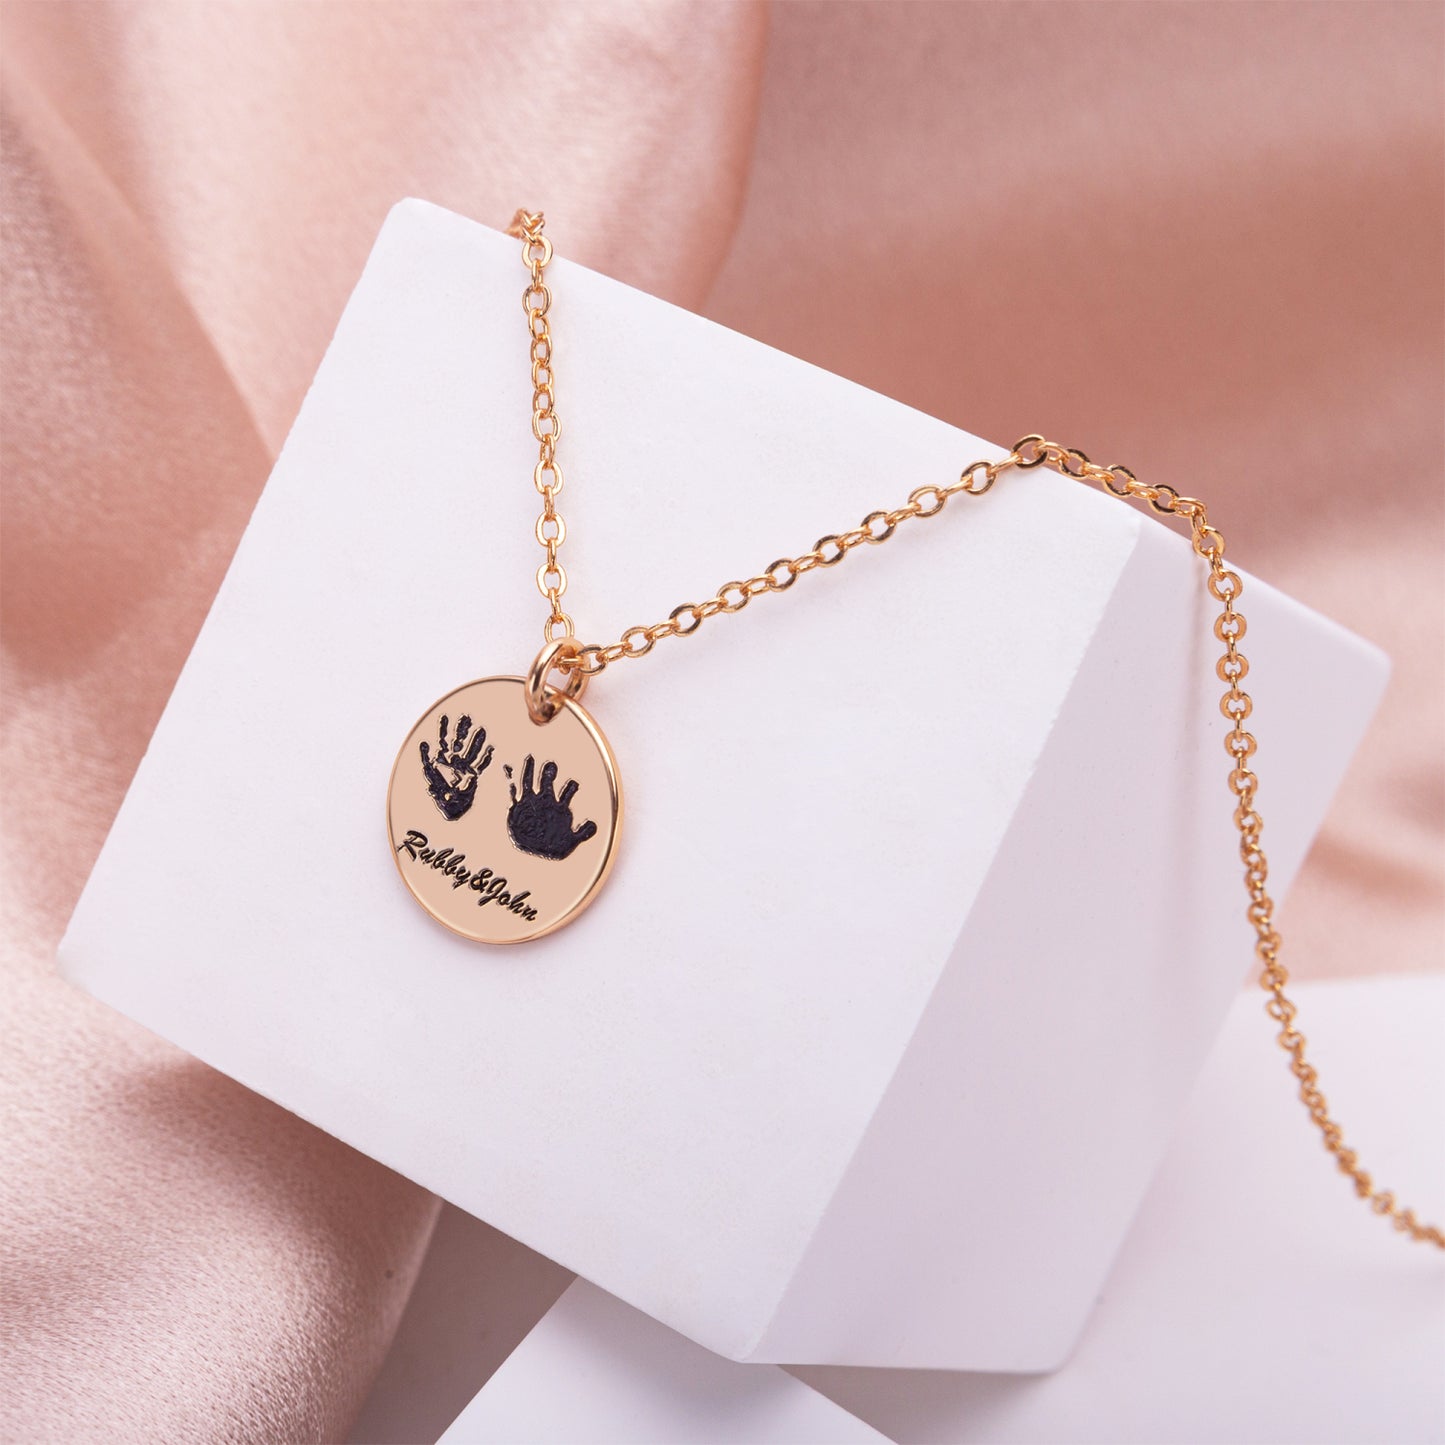 Personalized Handprint Necklace with Name